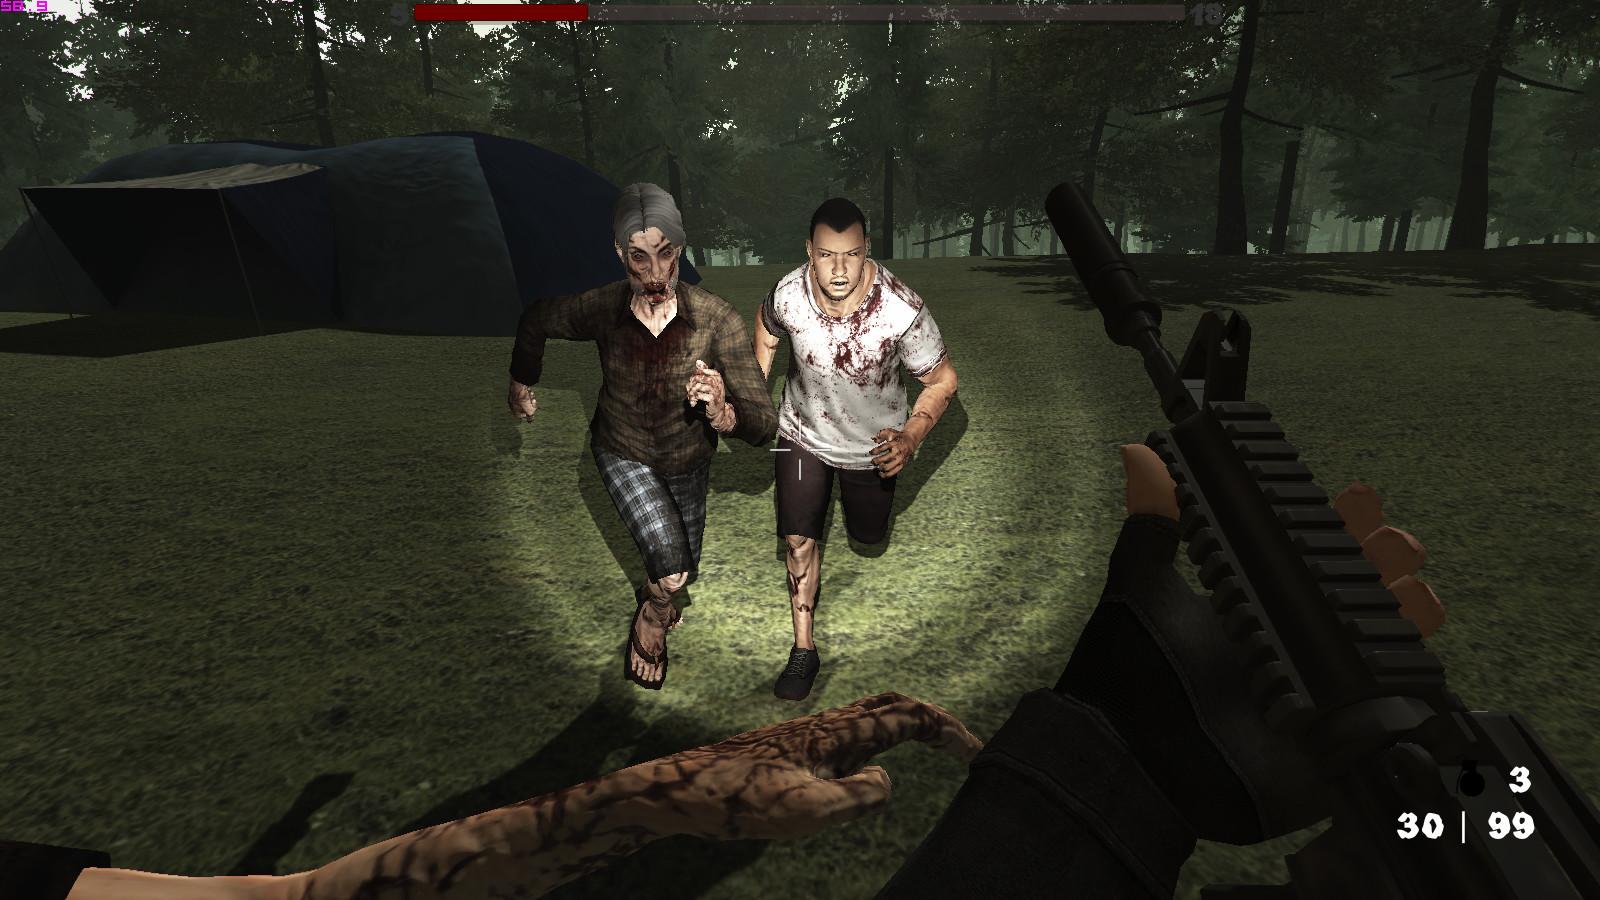 Screenshot №4 from game CONTRACTED